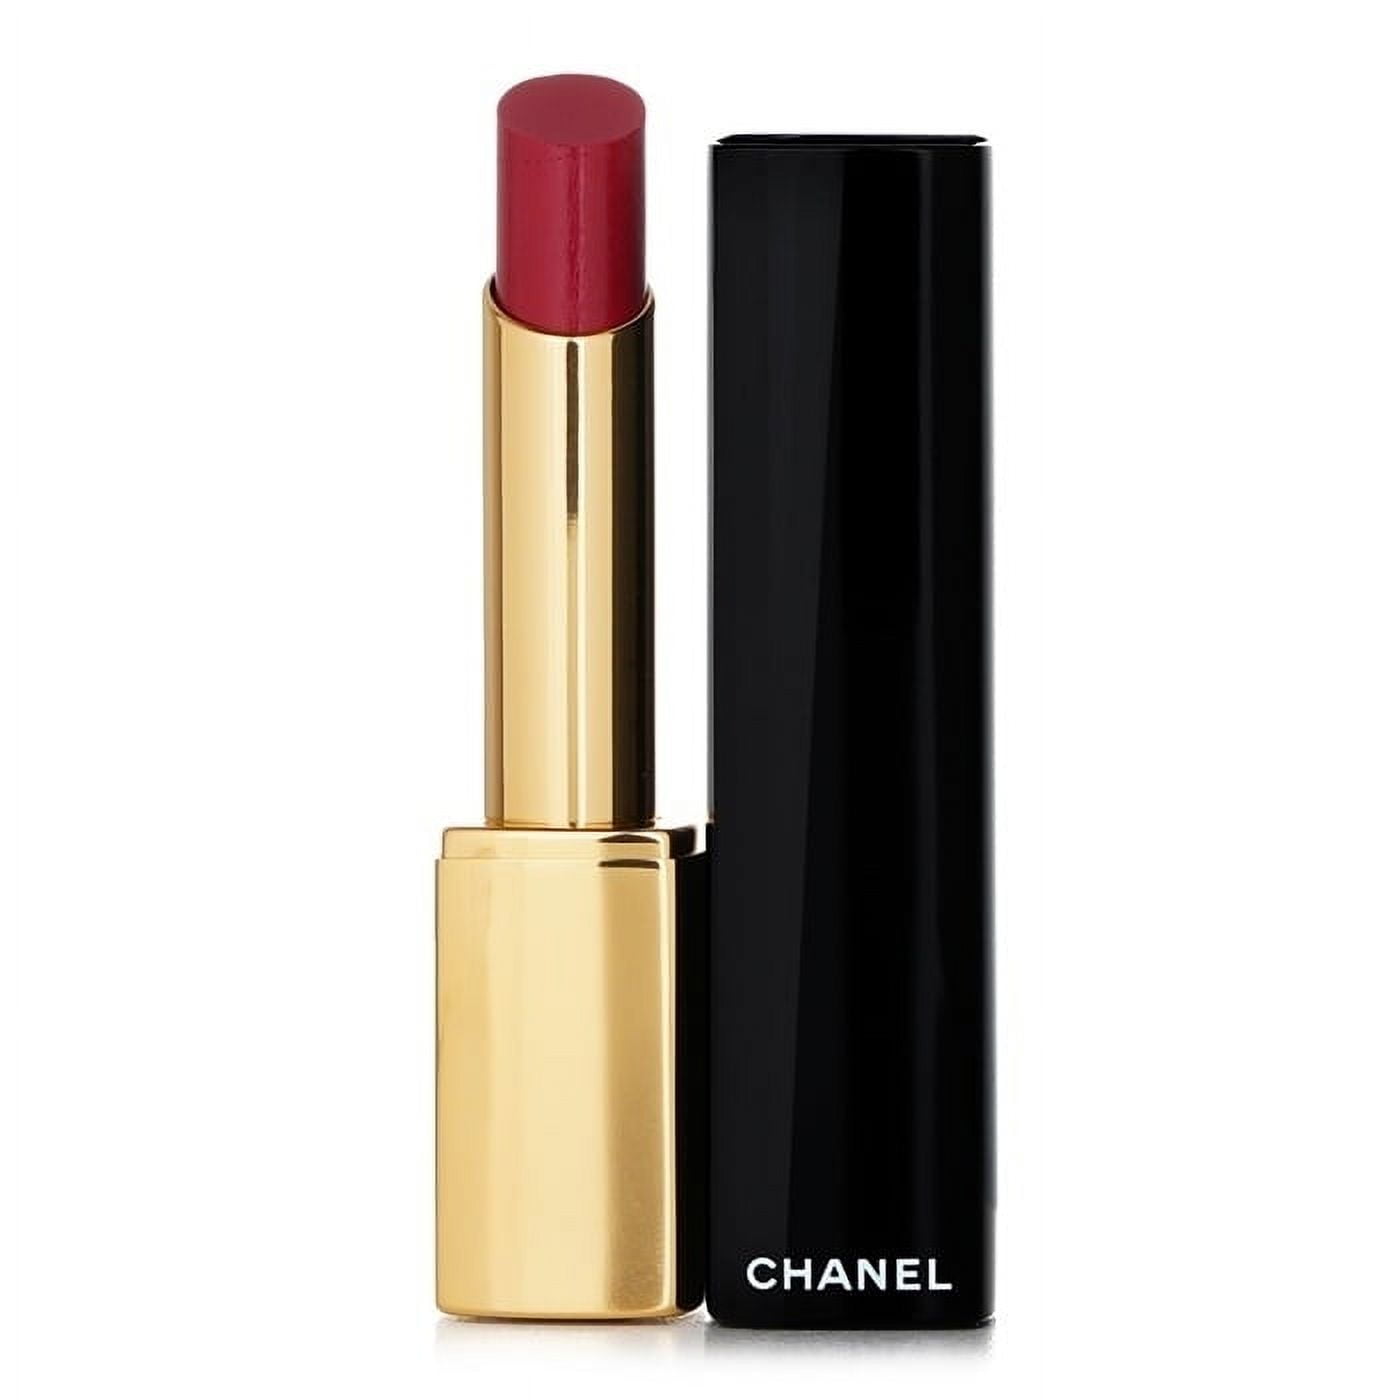 Chanel - Rouge Coco Flash Hydrating Vibrant Shine Lip Colour - # 148 Lively  3g/0.1oz